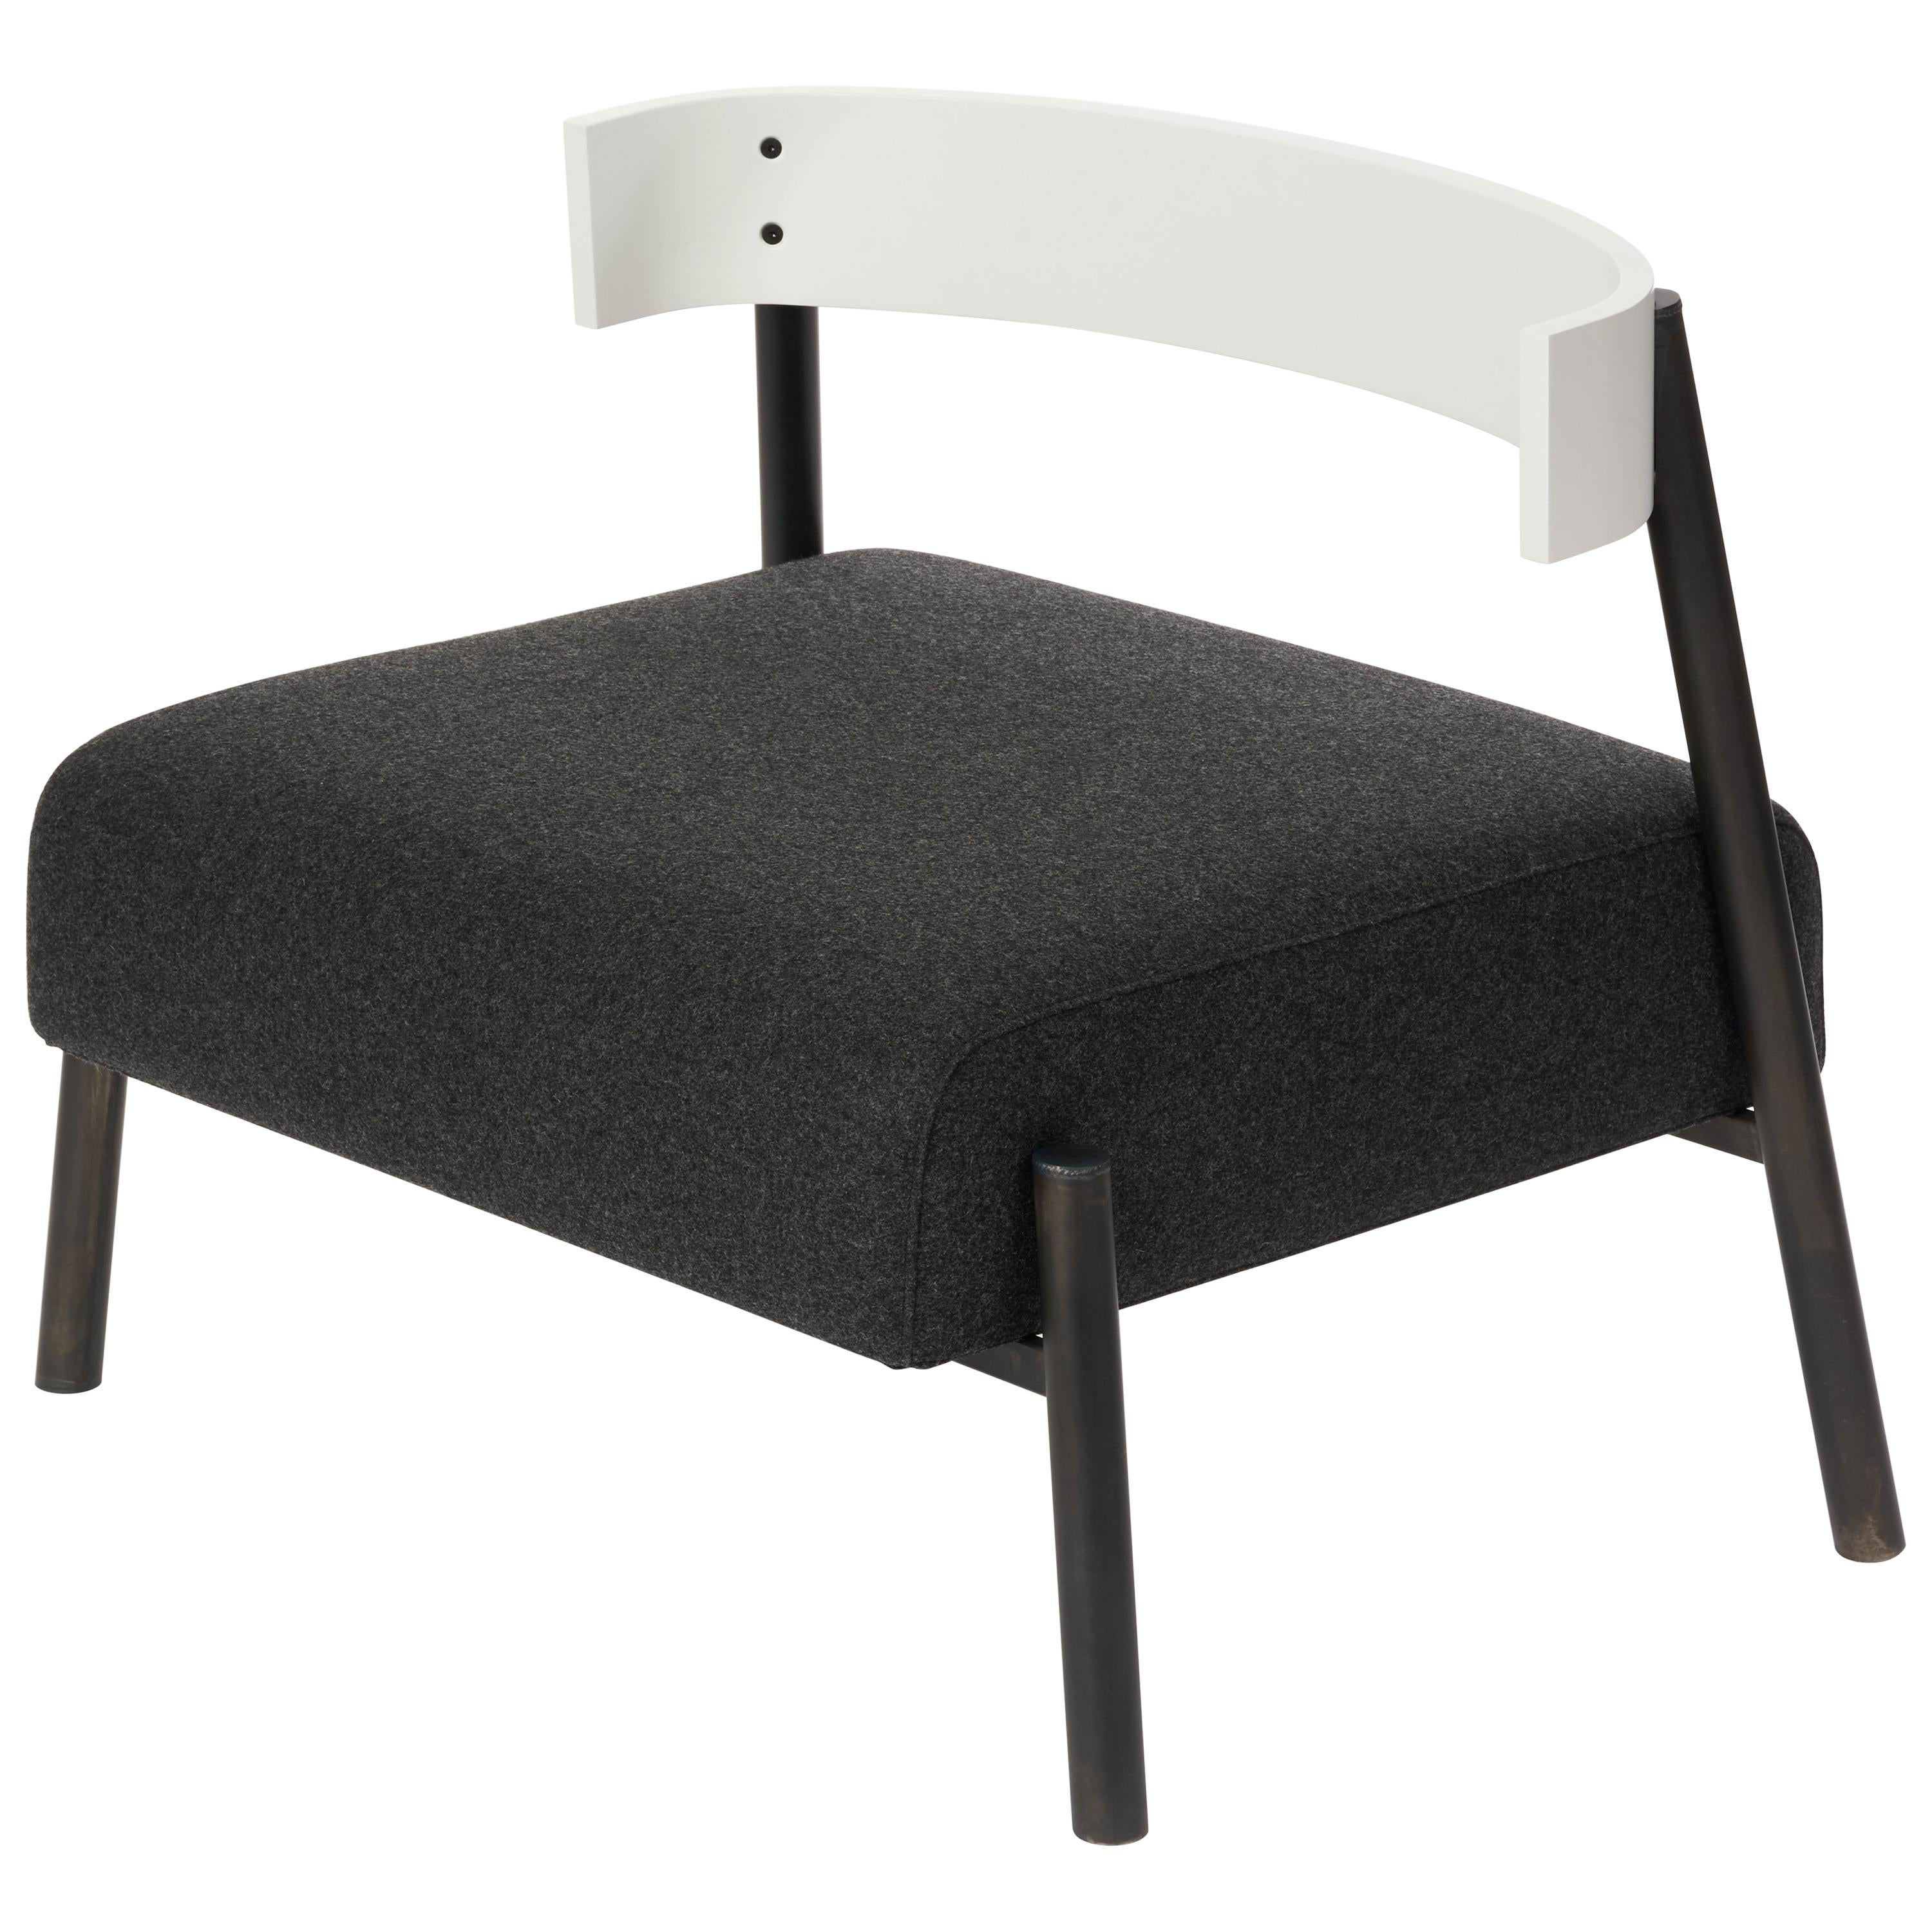 Roque Lounge Chair, Melton Wool and Eco-Friendly Powder Coated Steel Frame For Sale